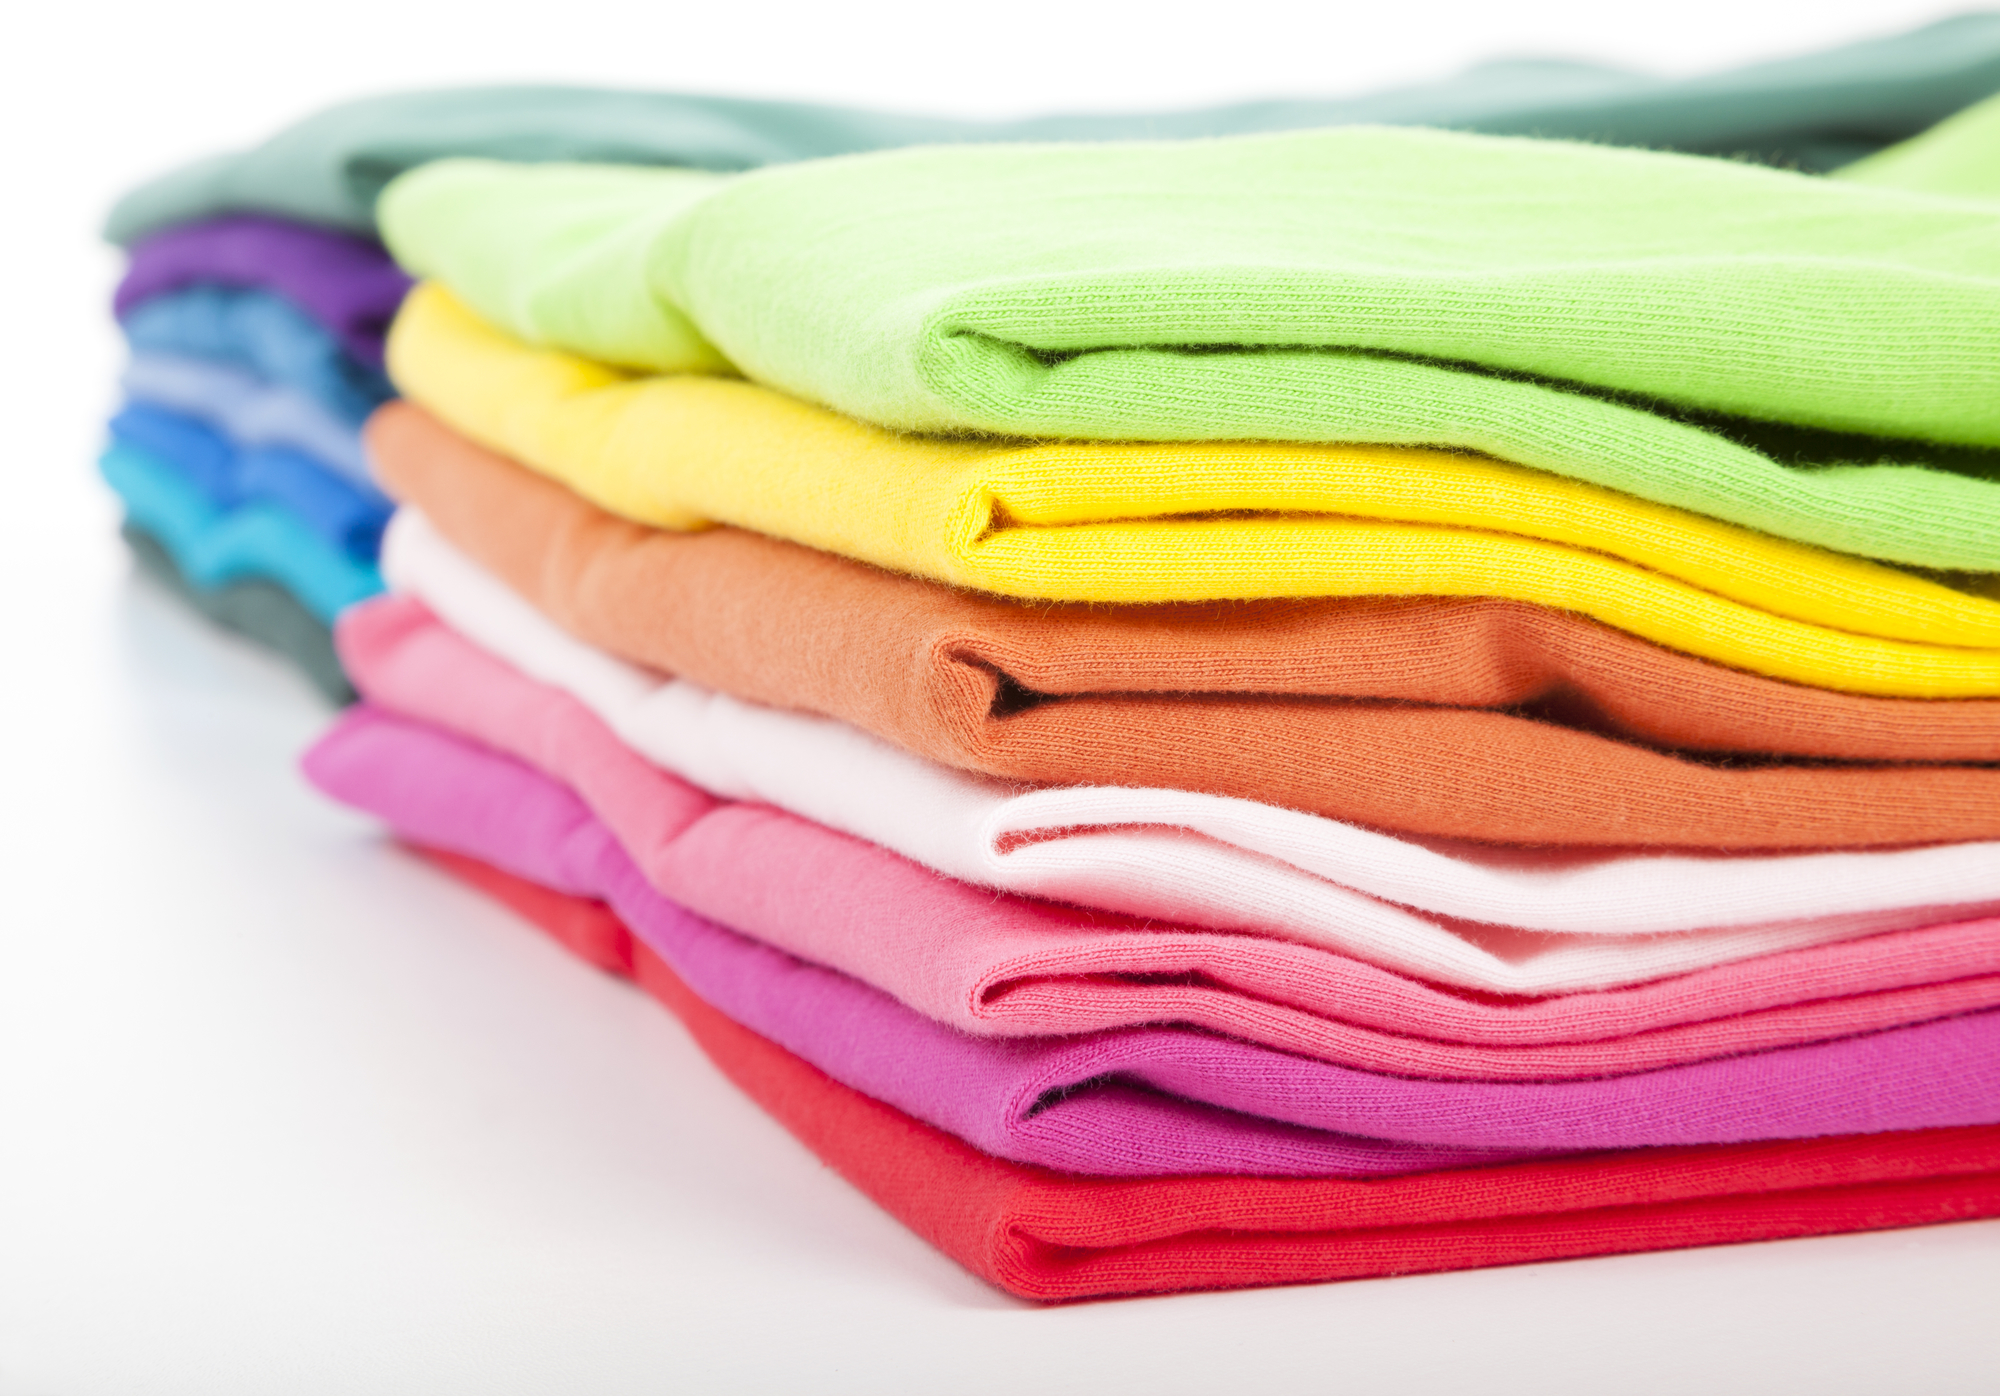 What Colors To Wash Together Cheaper Than Retail Price Buy Clothing Accessories And Lifestyle Products For Women Men